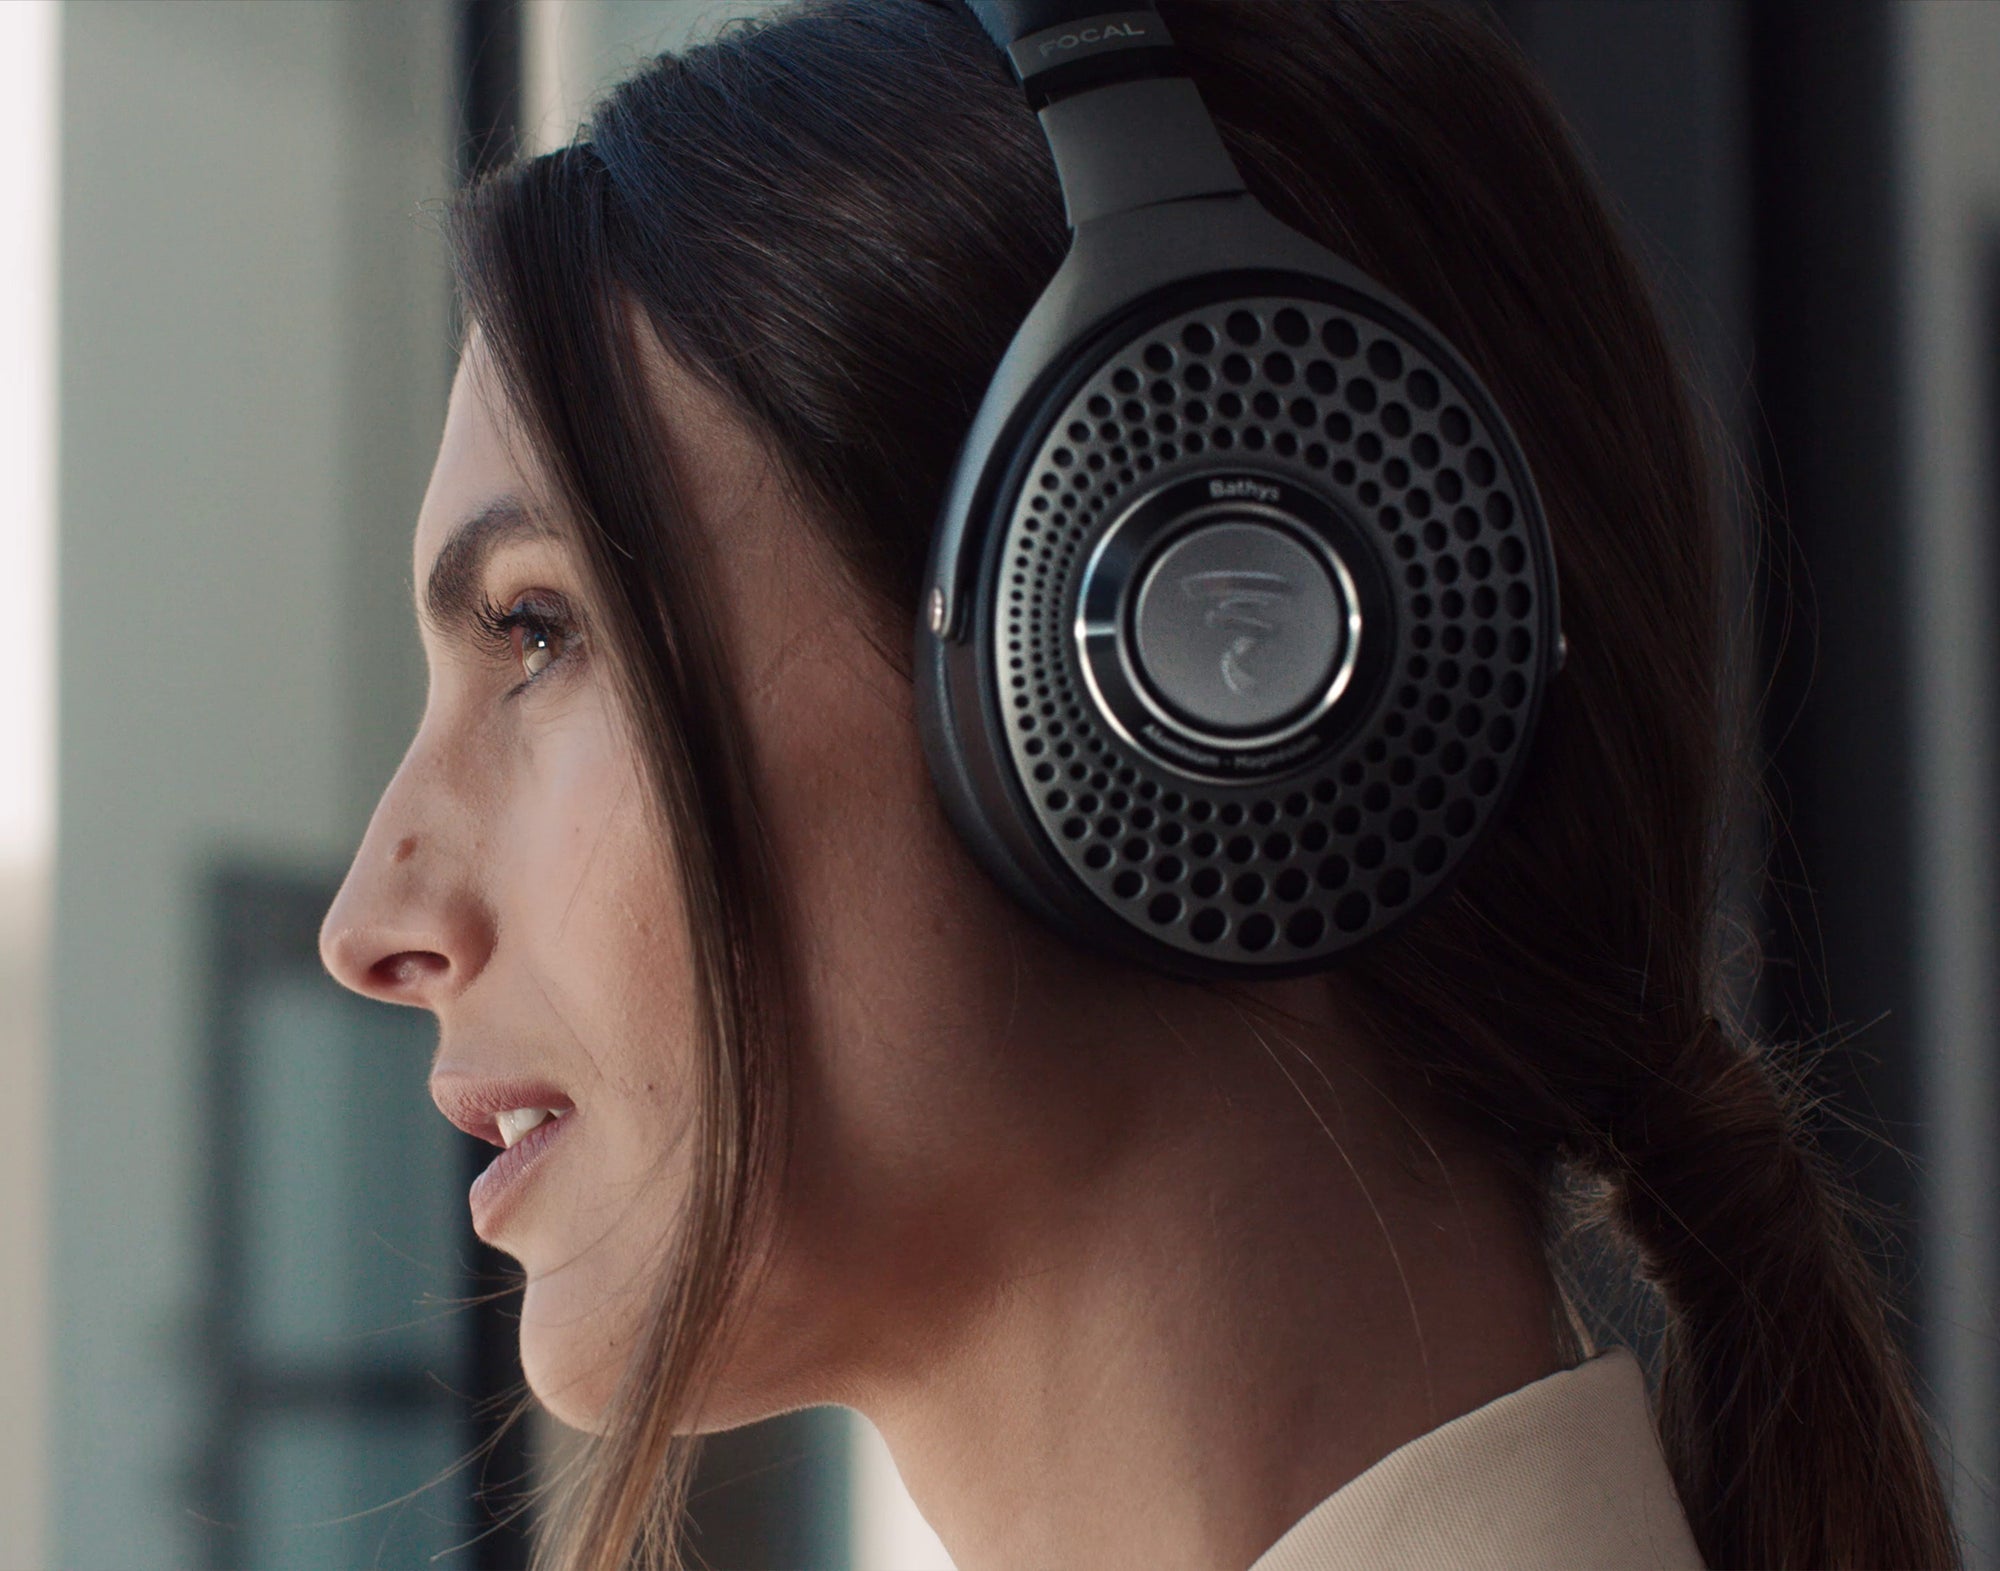 Focal Bathys Wireless Bluetooth Closed-back Headphones with Active Noise  Canceling